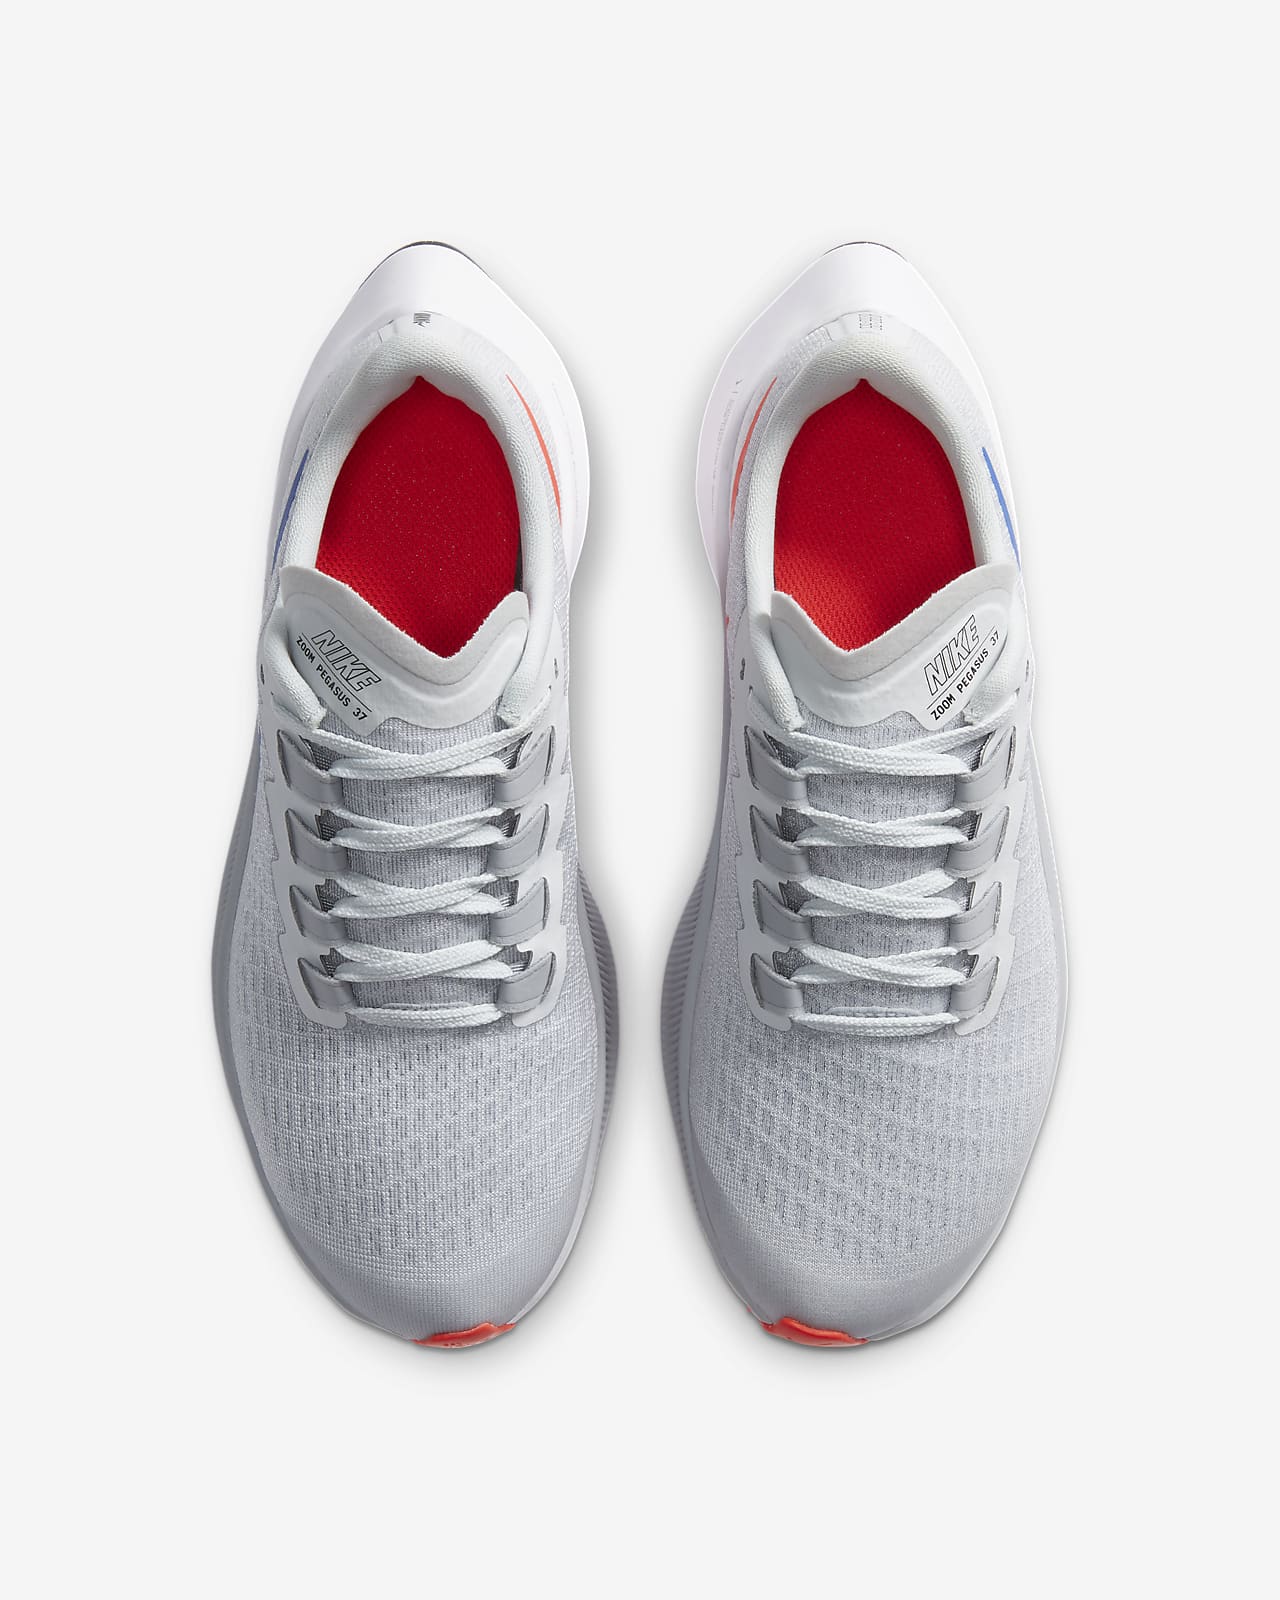 nike wolf grey running shoes